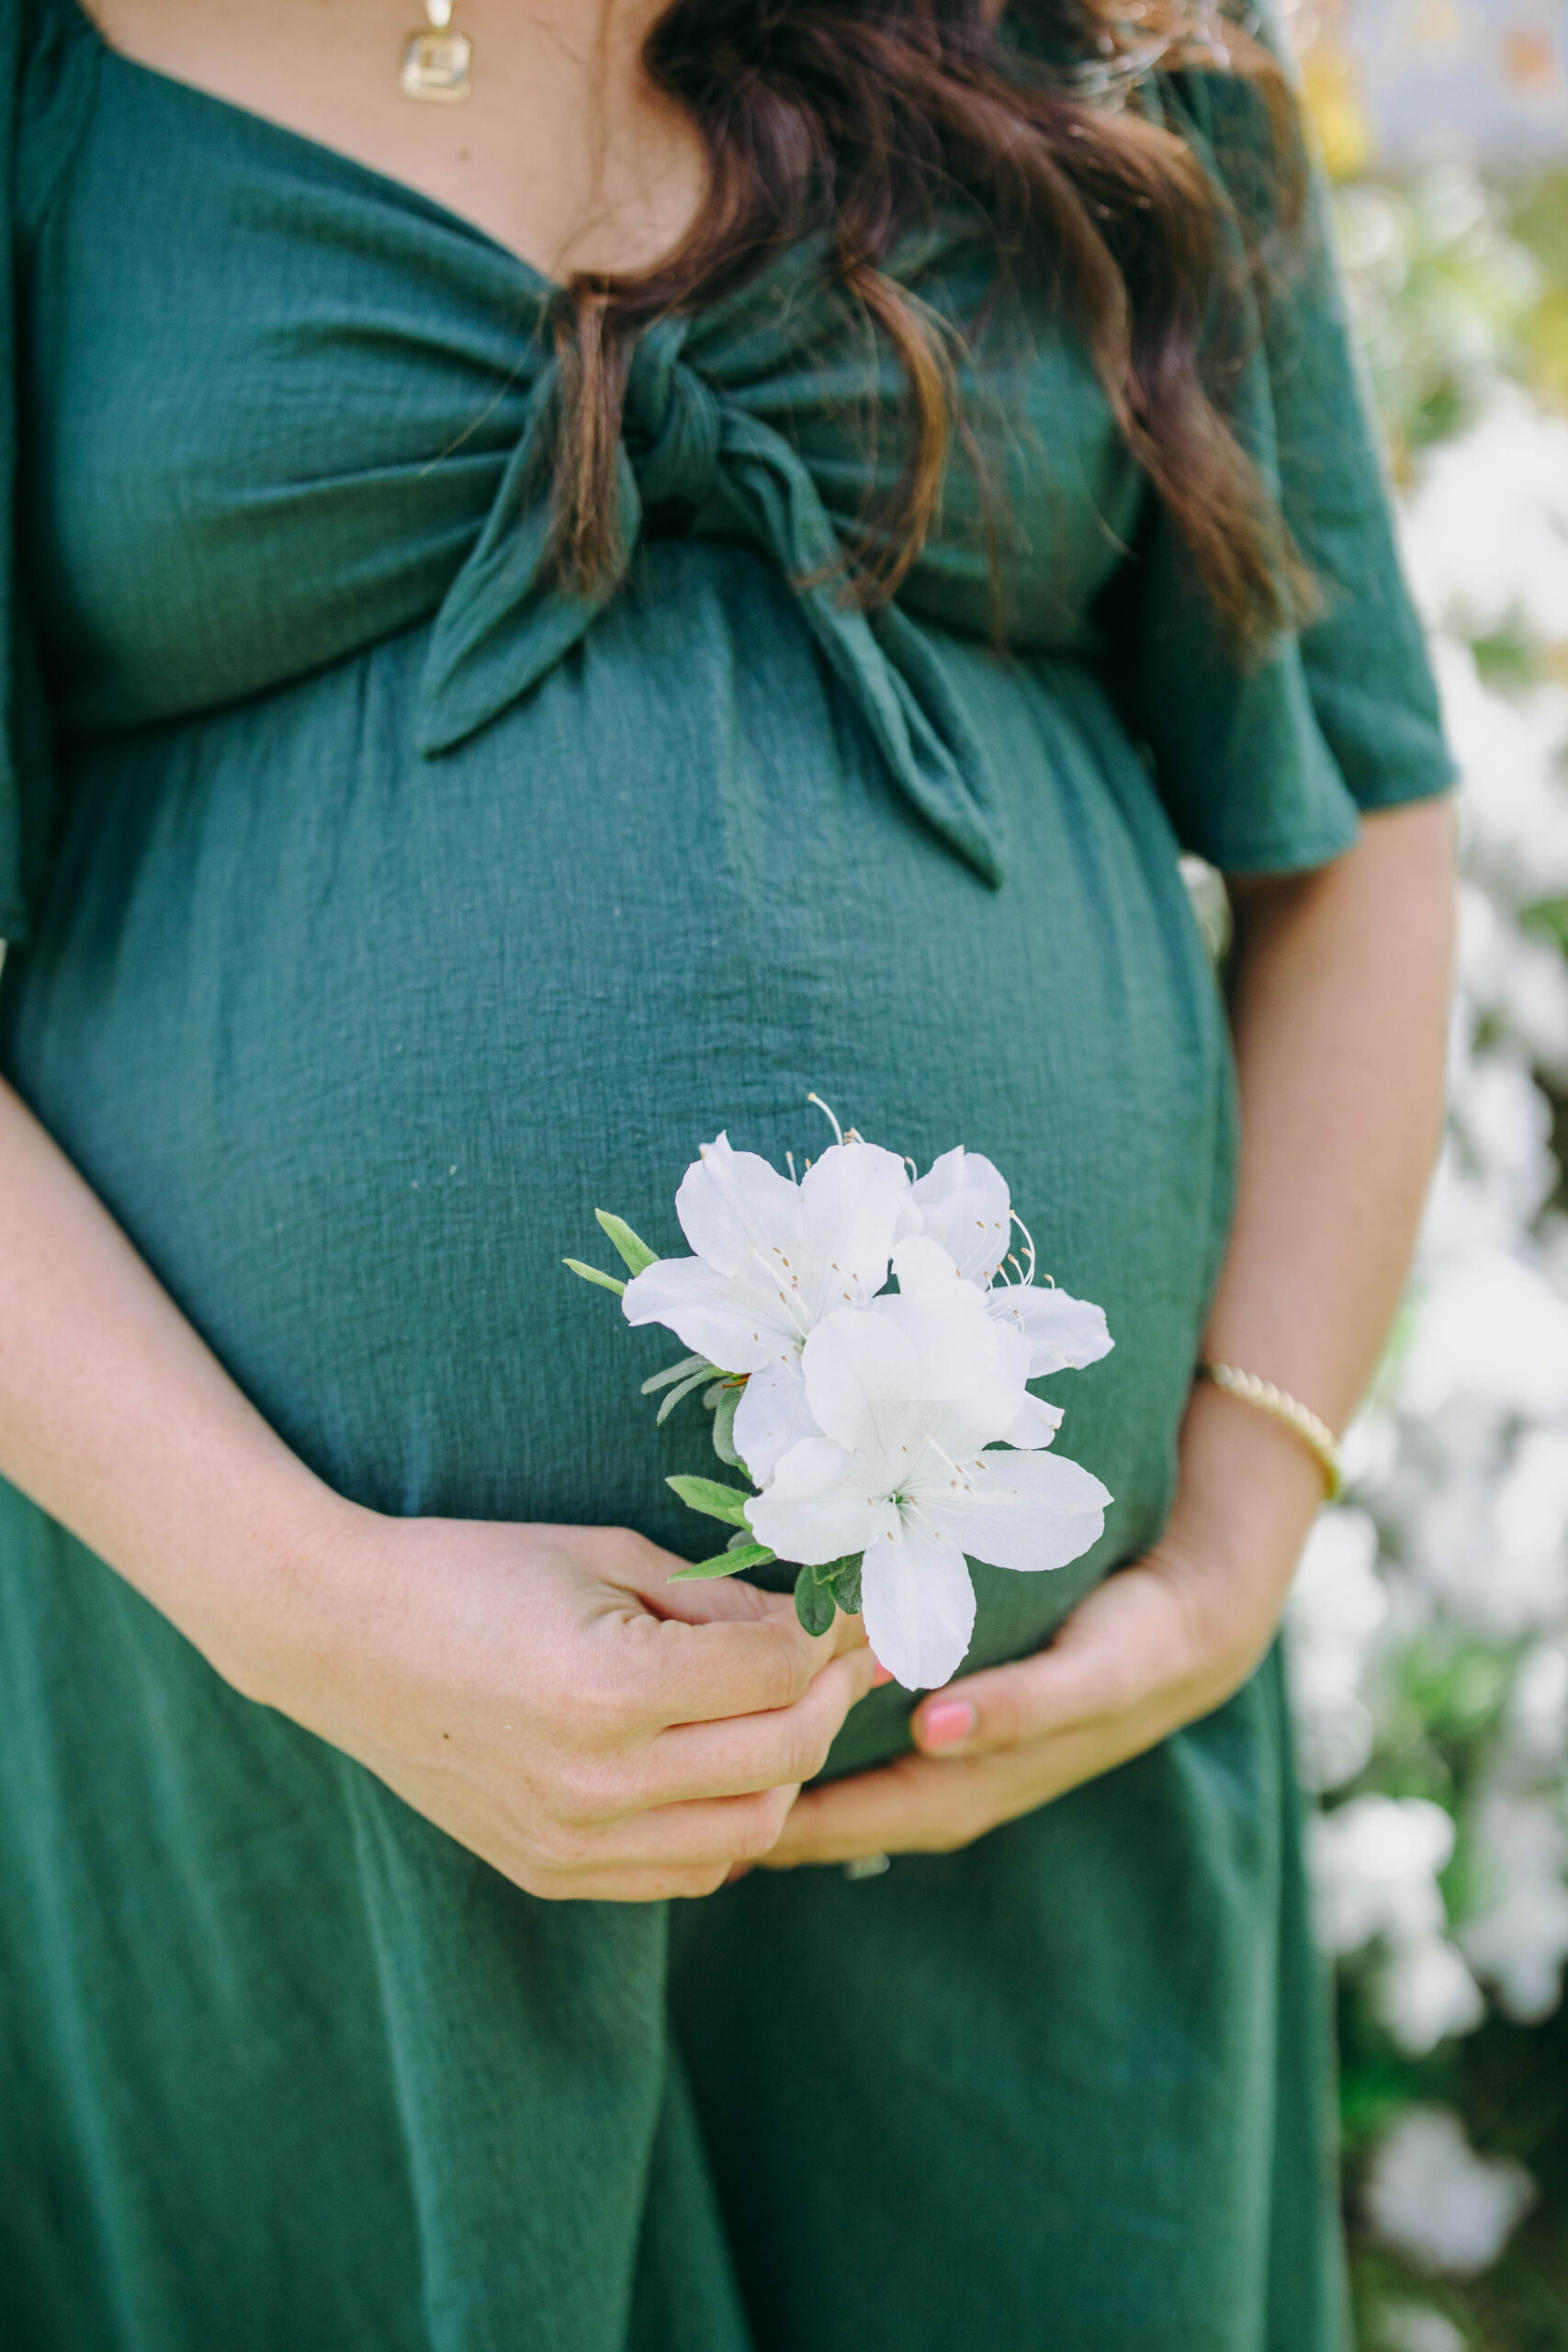 maternity photo of mother's belly and flowers